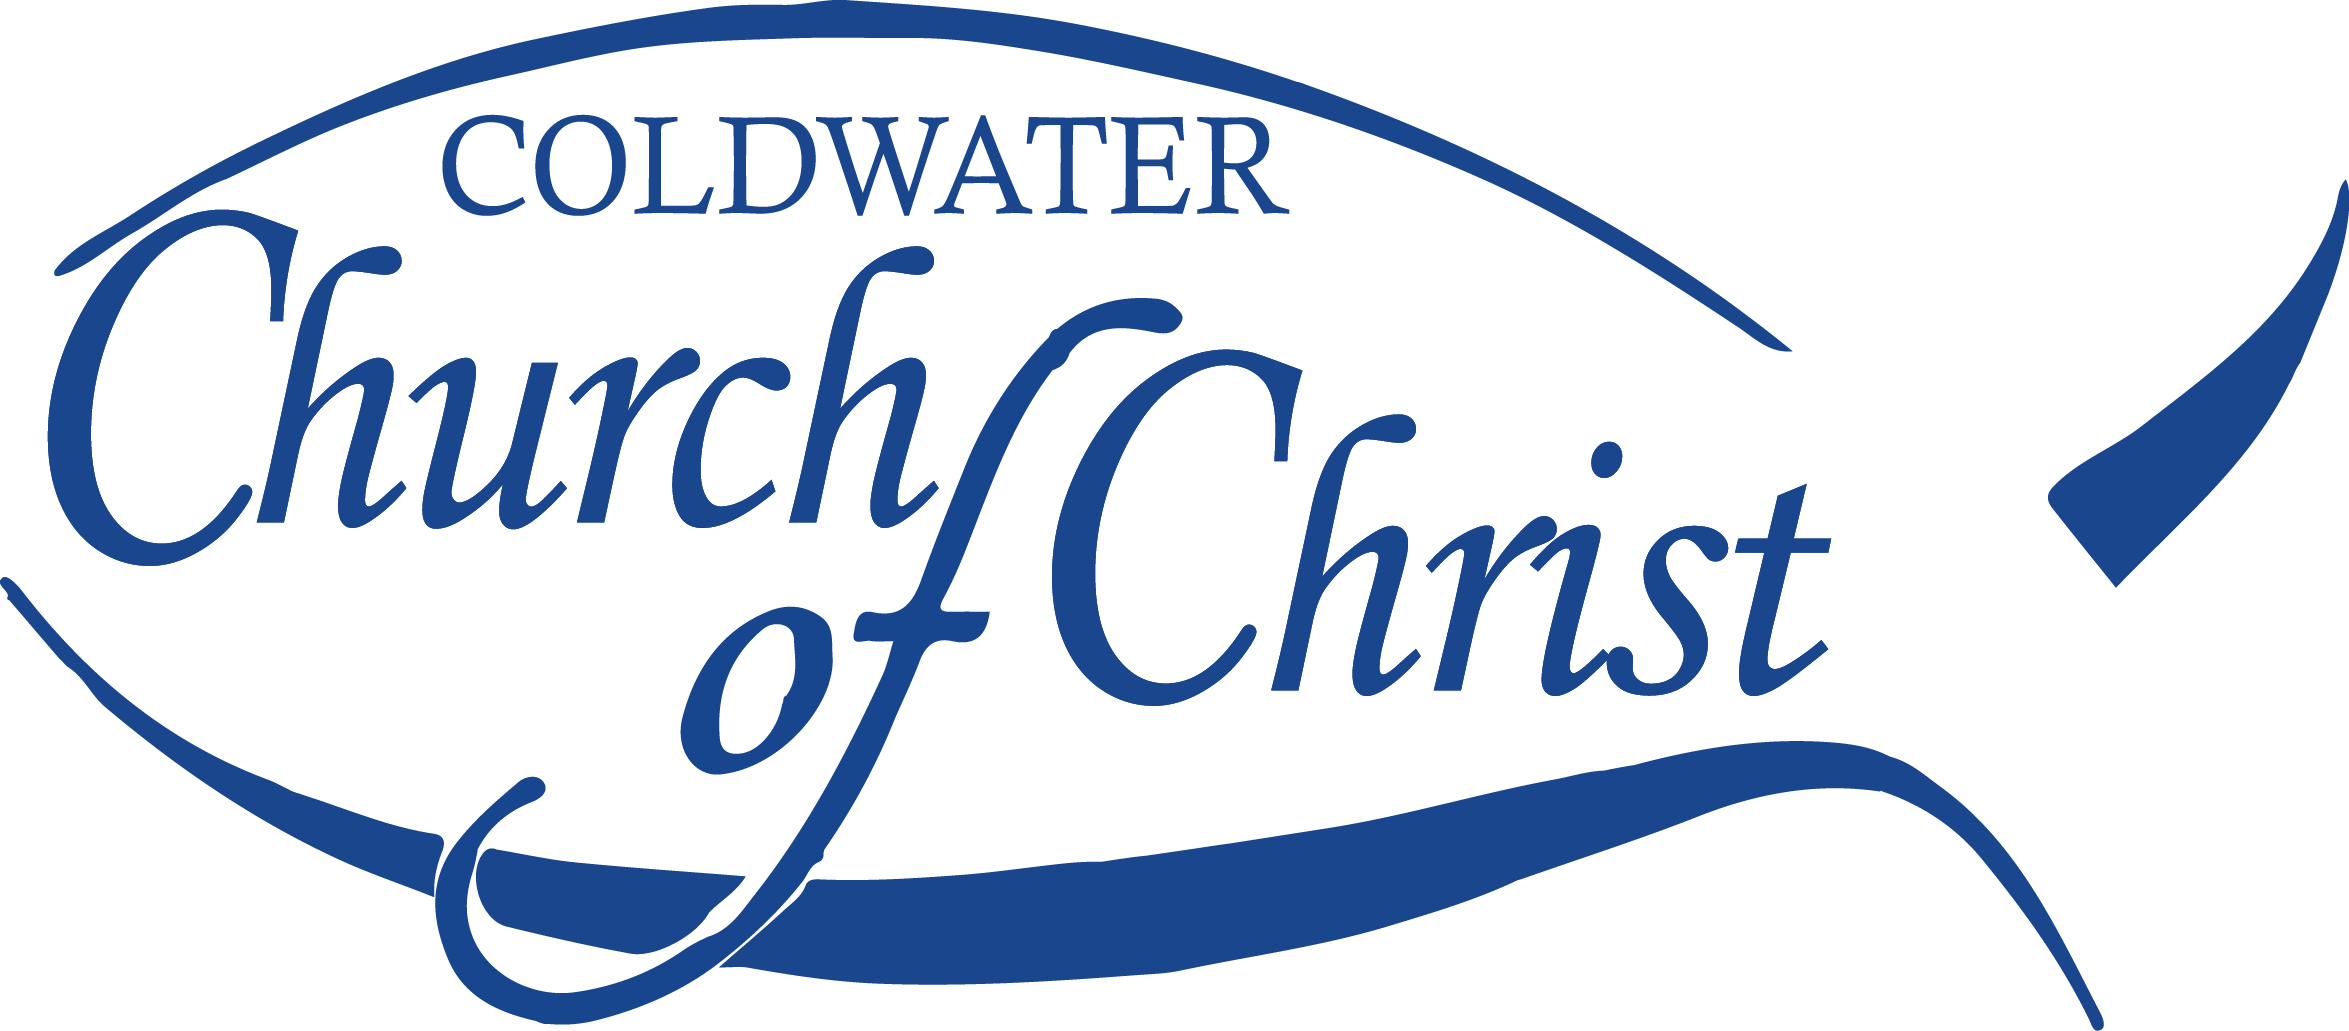 Coldwater church of Christ